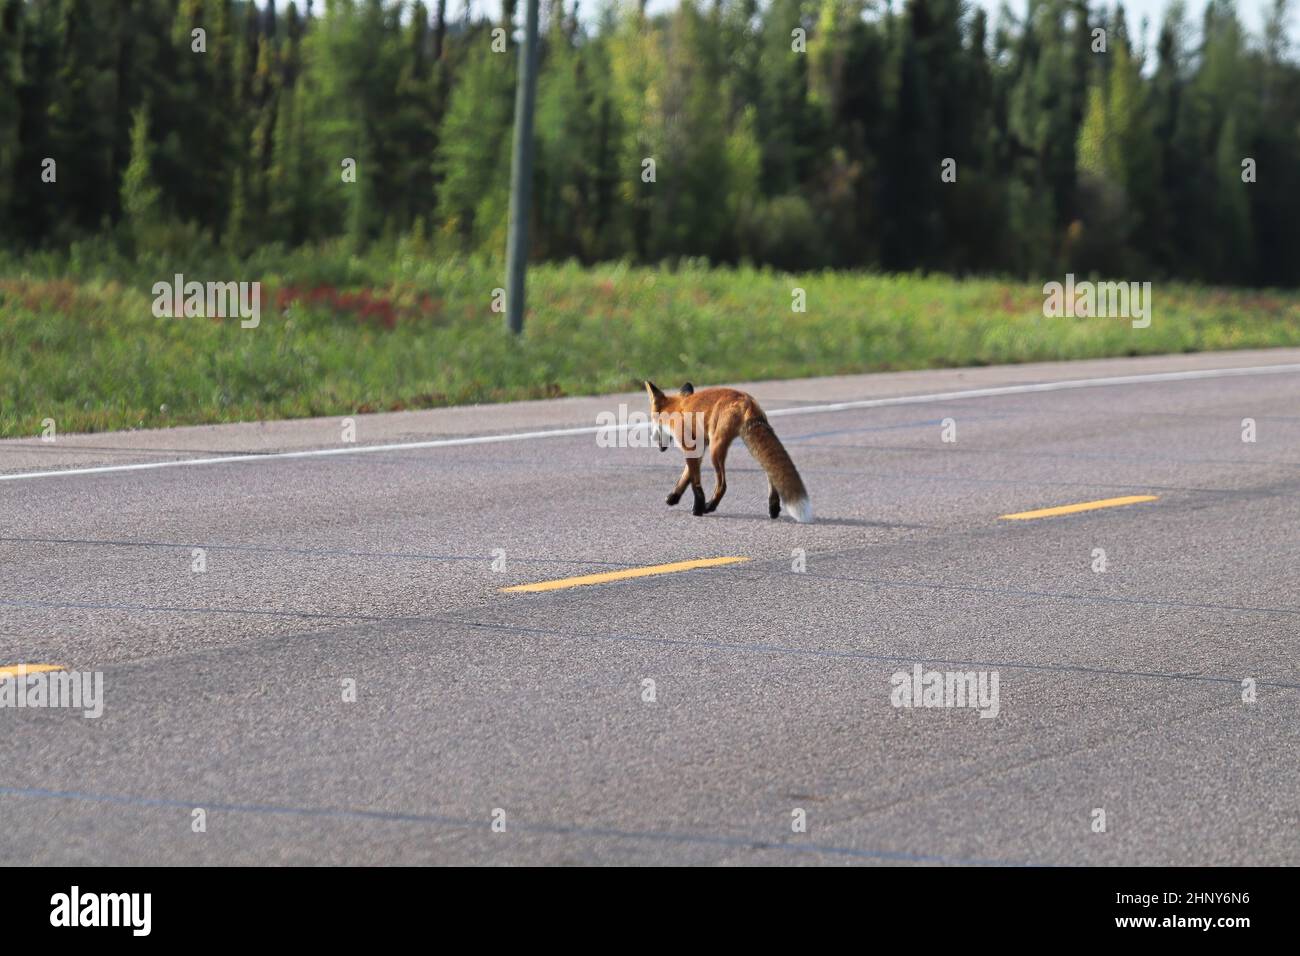 A fox crossing the highway in a forest area. Stock Photo